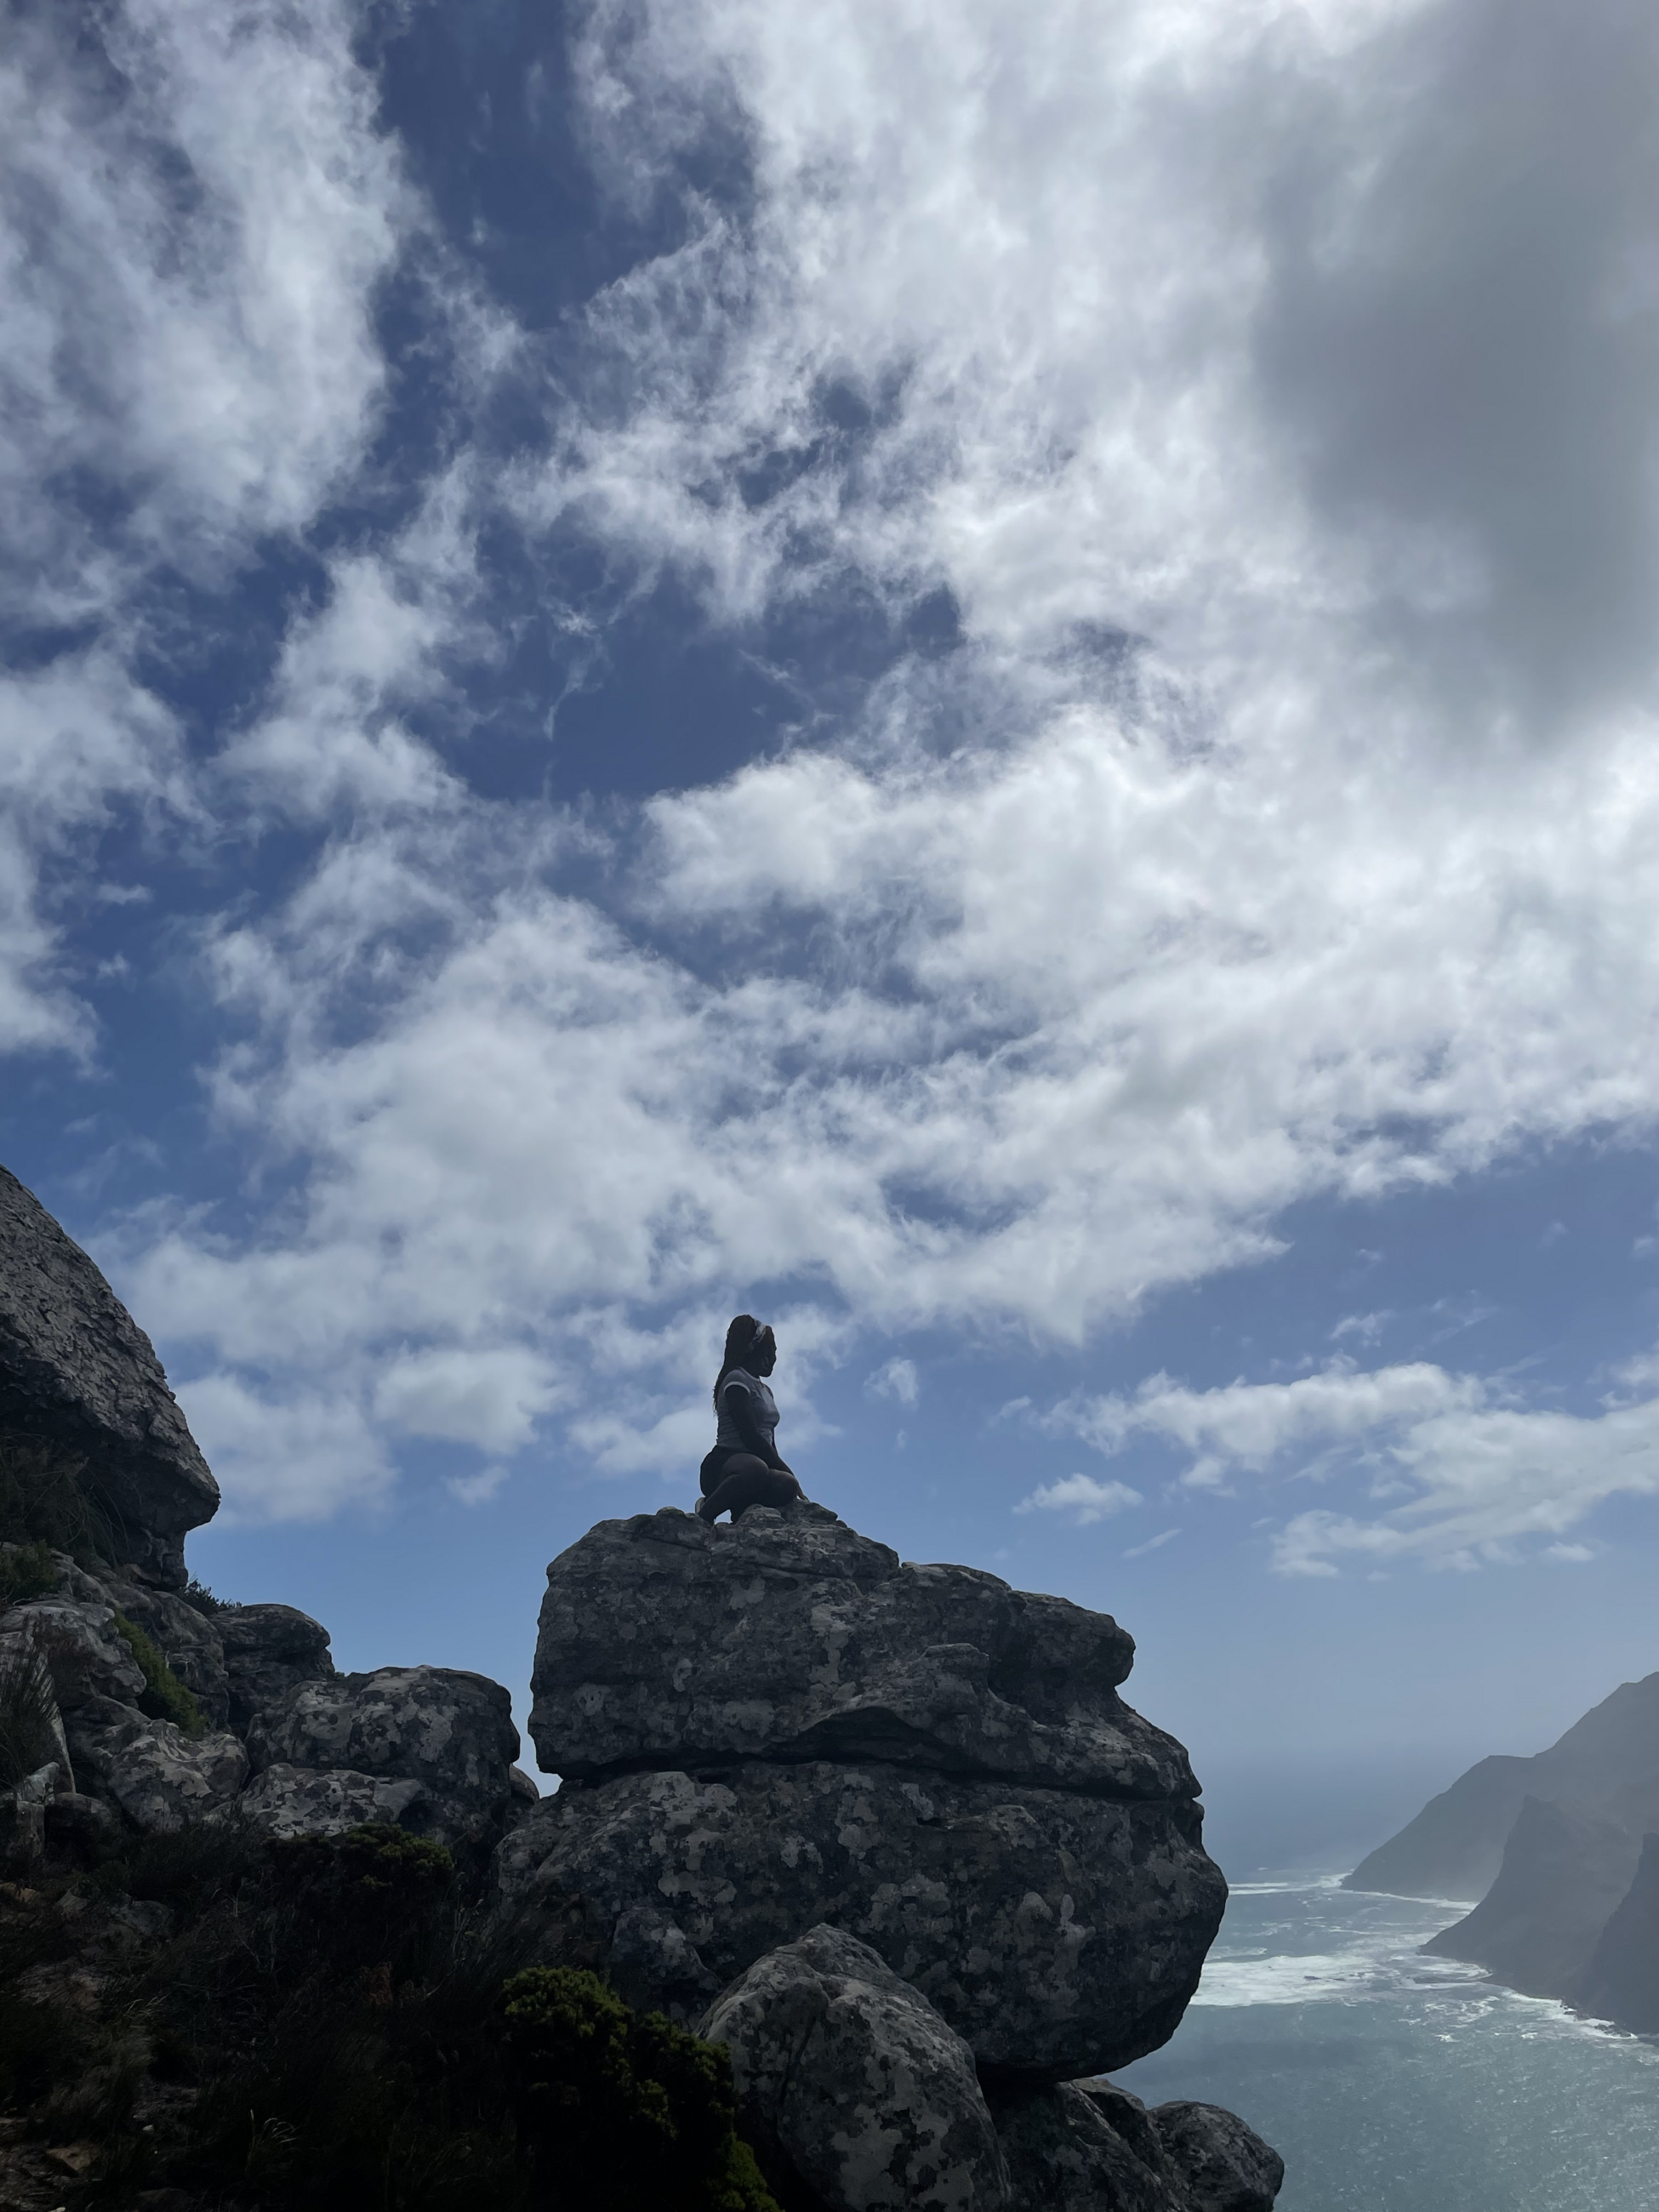 The views from hiking Chapman's Peak in Cape Town.